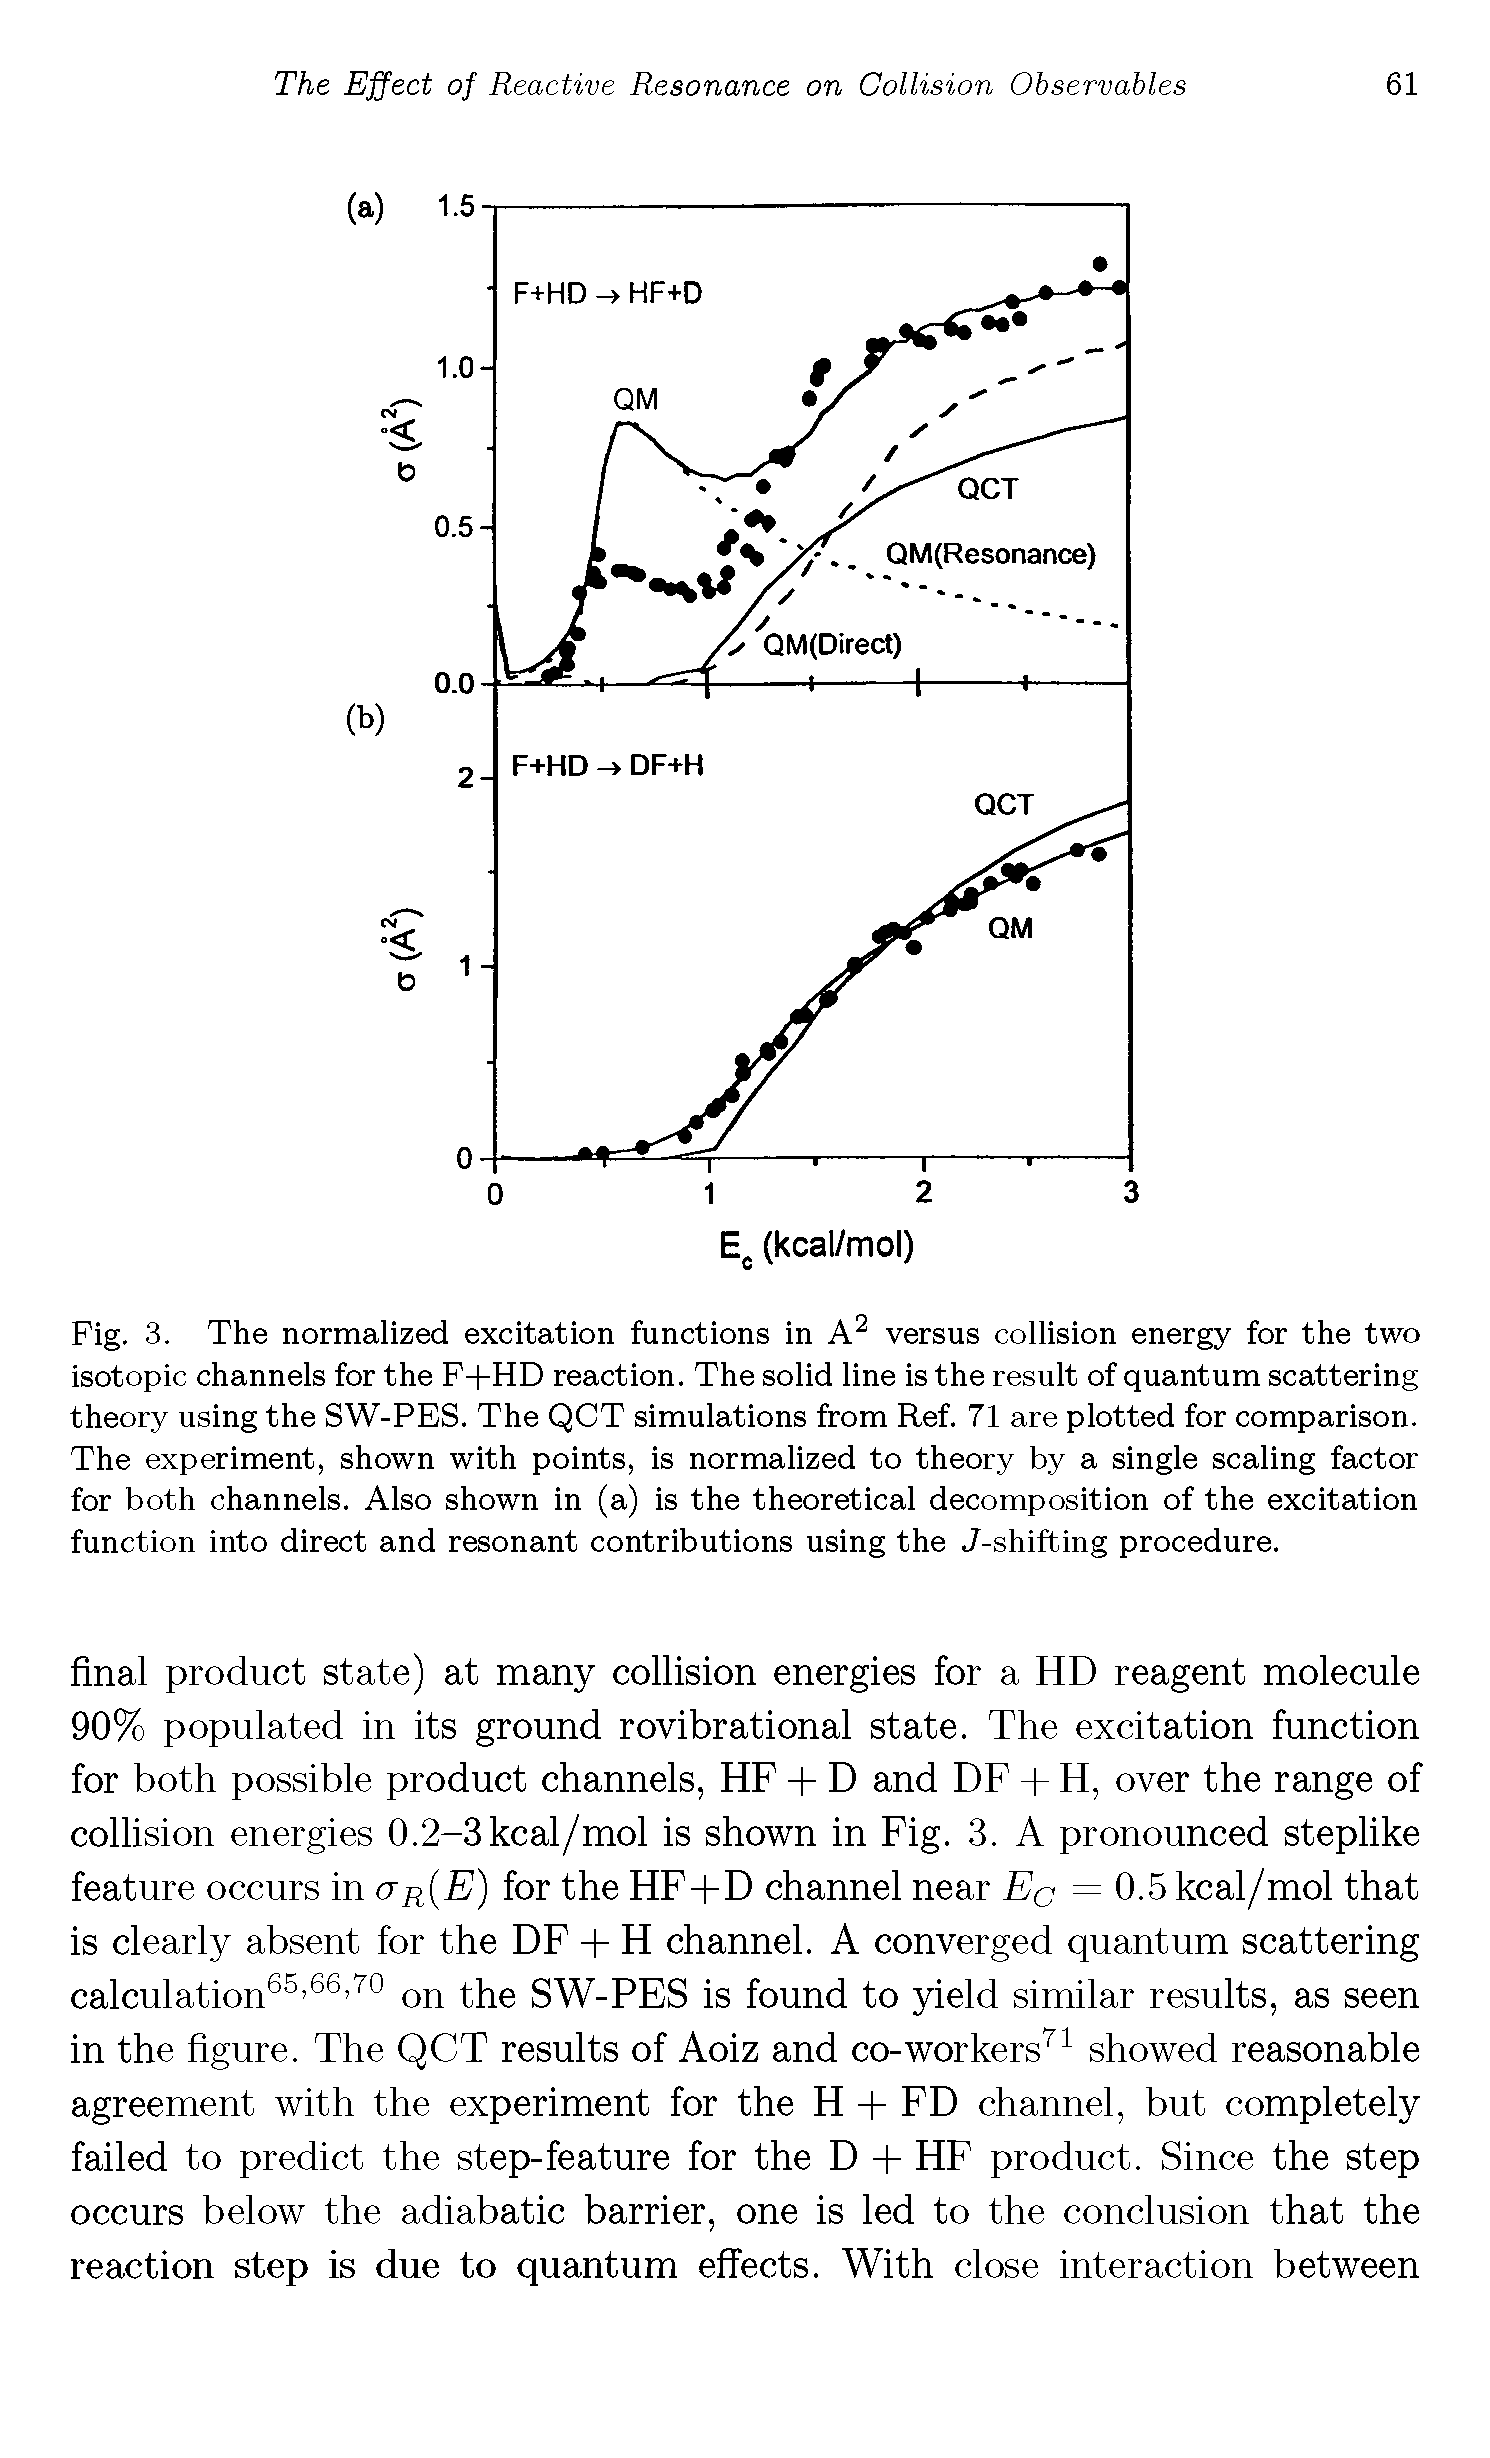 Fig. 3. The normalized excitation functions in A2 versus collision energy for the two isotopic channels for the F+HD reaction. The solid line is the result of quantum scattering theory using the SW-PES. The QCT simulations from Ref. 71 are plotted for comparison. The experiment, shown with points, is normalized to theory by a single scaling factor for both channels. Also shown in (a) is the theoretical decomposition of the excitation function into direct and resonant contributions using the J-shifting procedure.